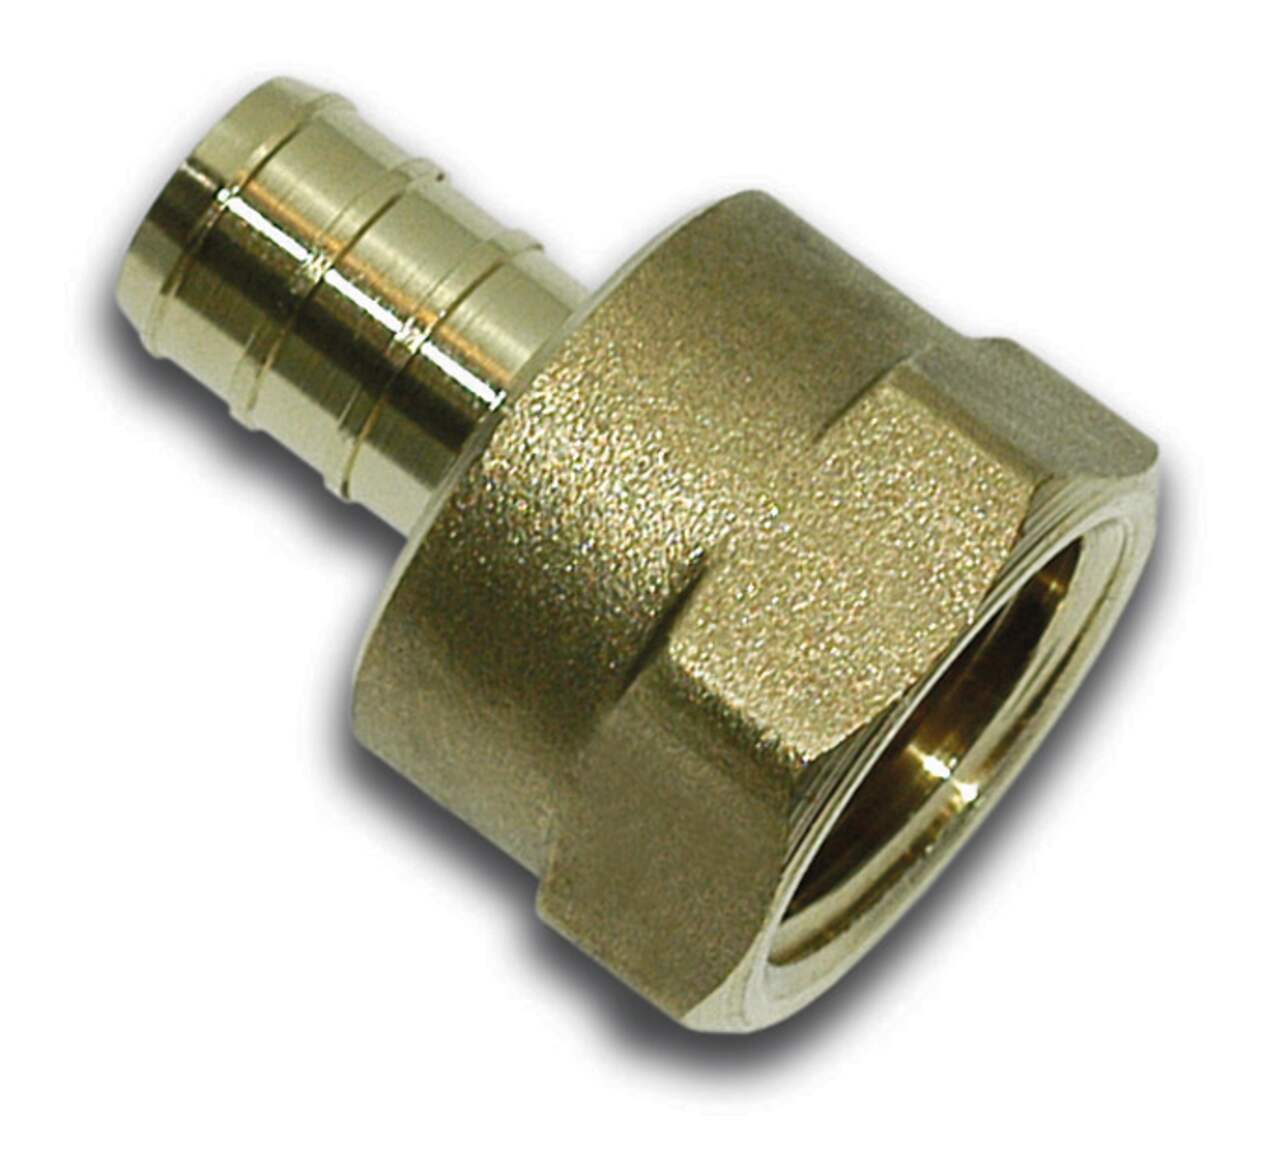 https://media-www.canadiantire.ca/product/fixing/plumbing/rough-plumbing/0631465/pex-adapter-1-2-female-x-fpt-9fe9721c-7ab3-406c-92d2-c7032c41b59c.png?imdensity=1&imwidth=640&impolicy=mZoom